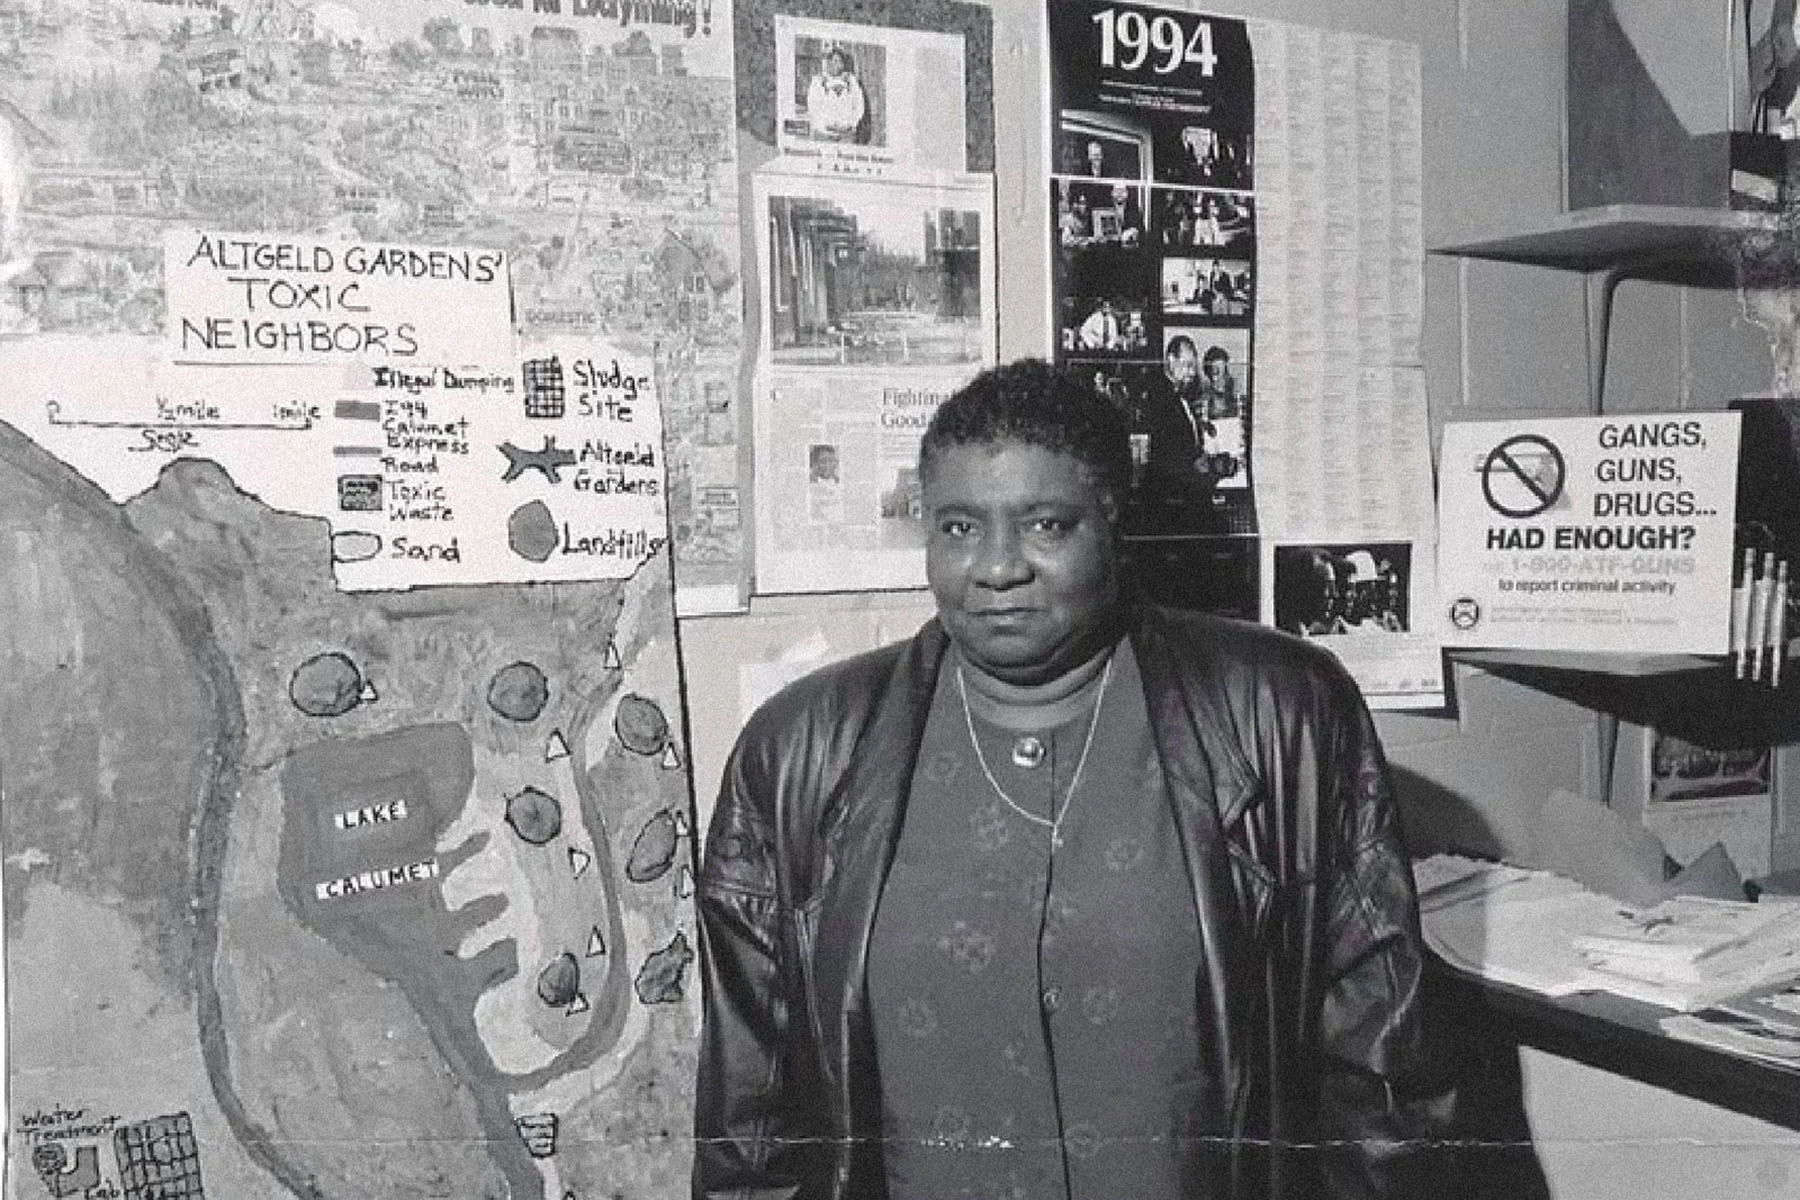 Hazel M. Johnson stands next to a map of Altgeld Gardens in Chicago, Illinois circa 1995.